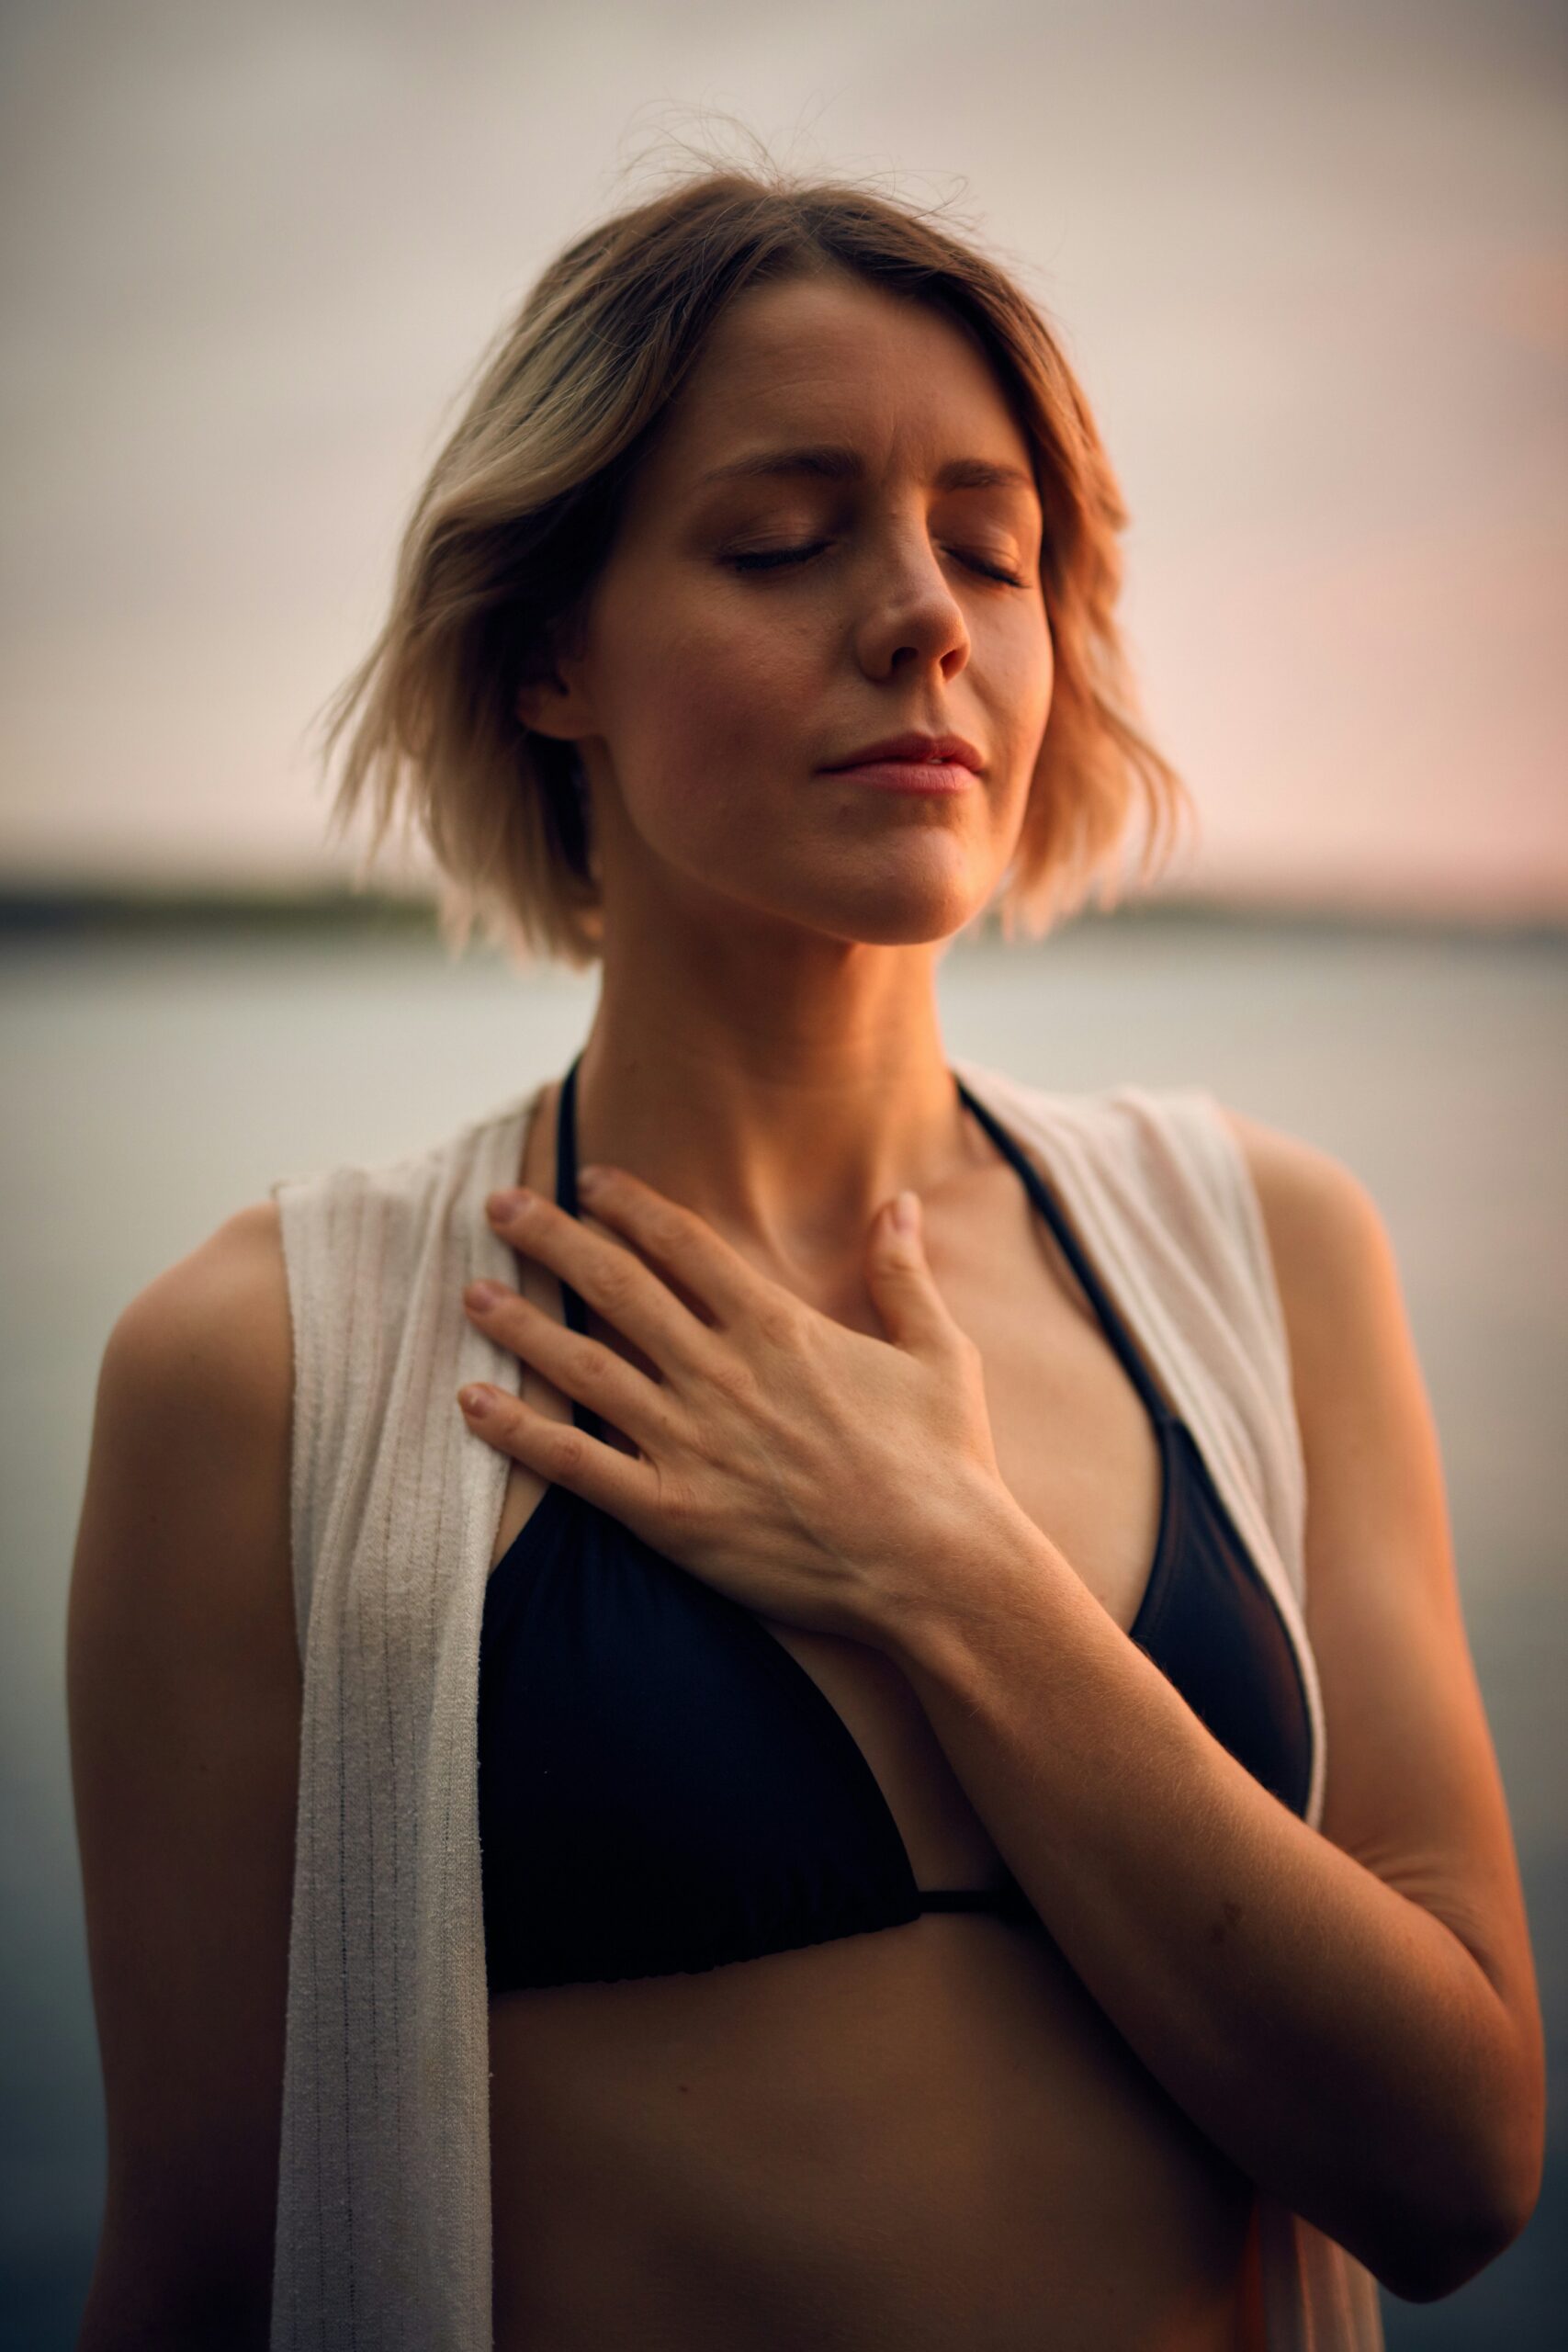 Woman with her hand on her heart breathing deeply